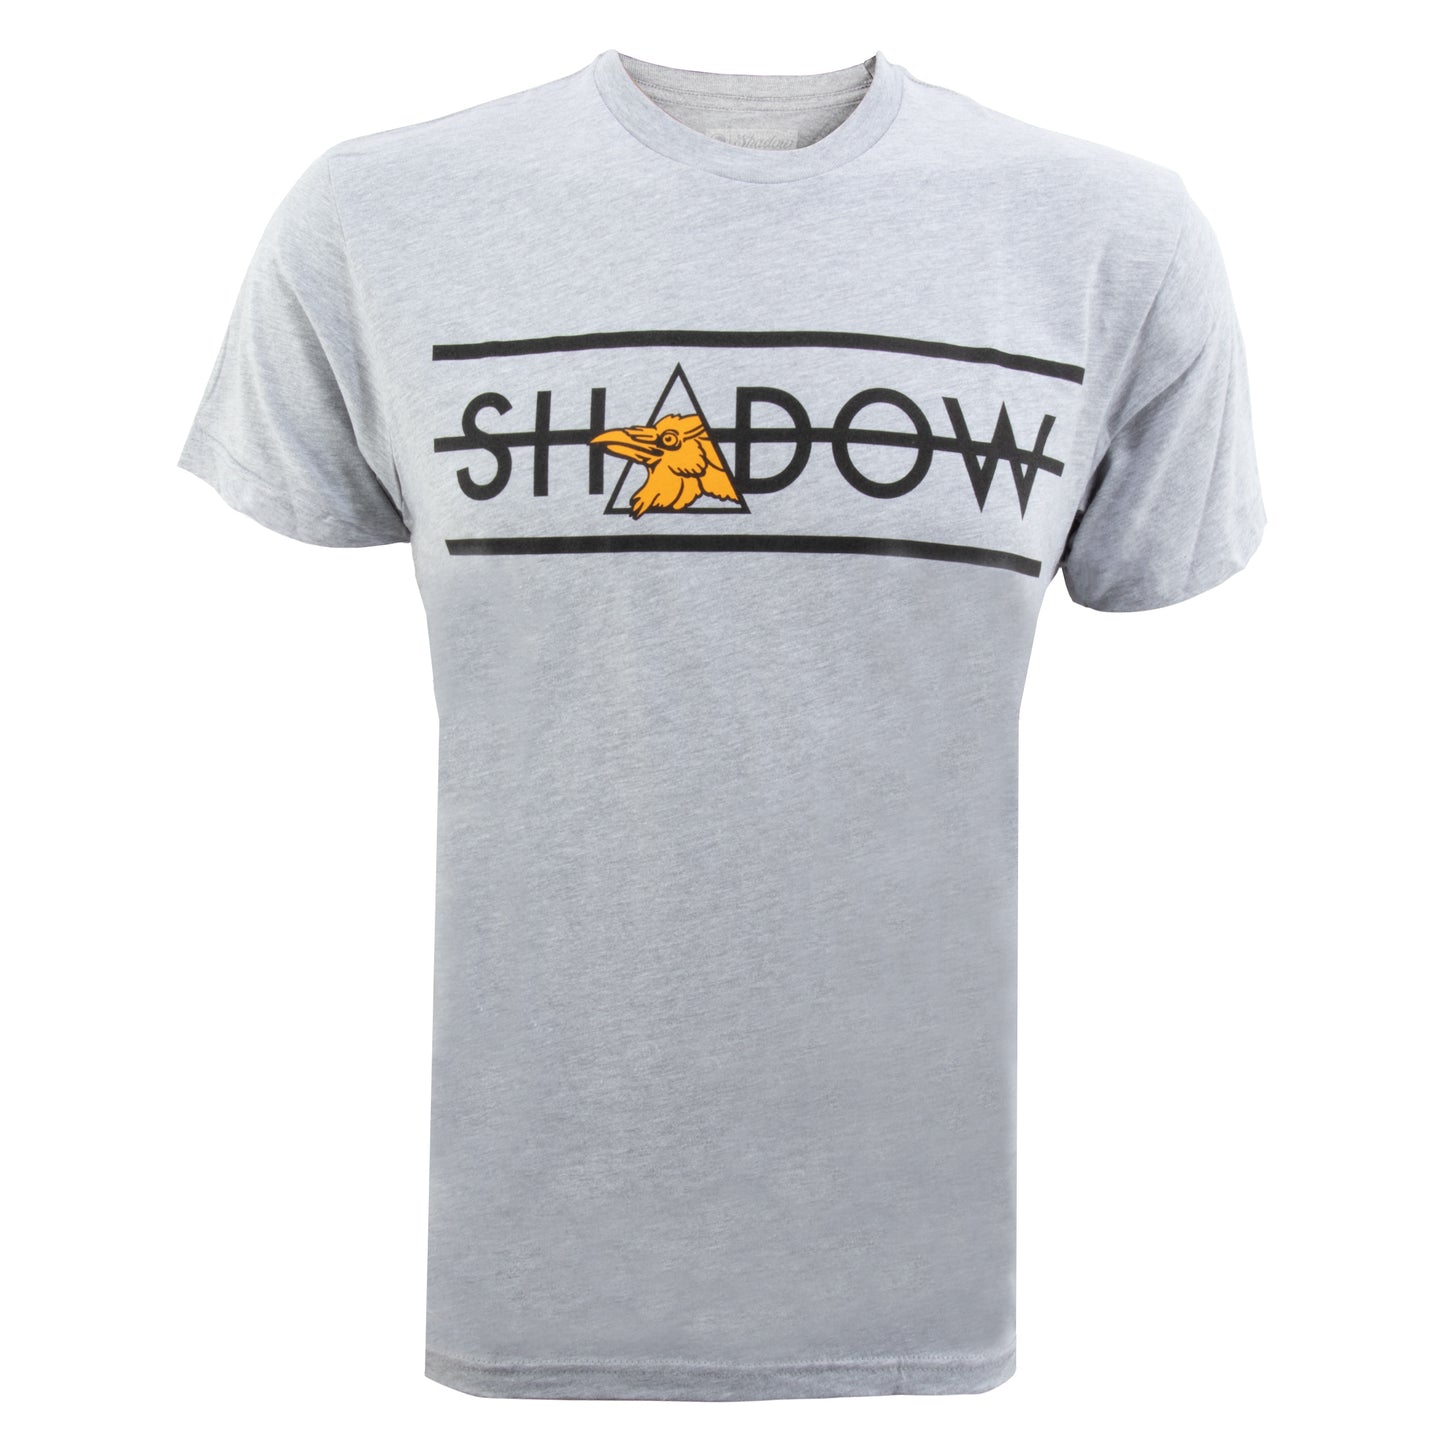 The Shadow Conspiracy Shirts